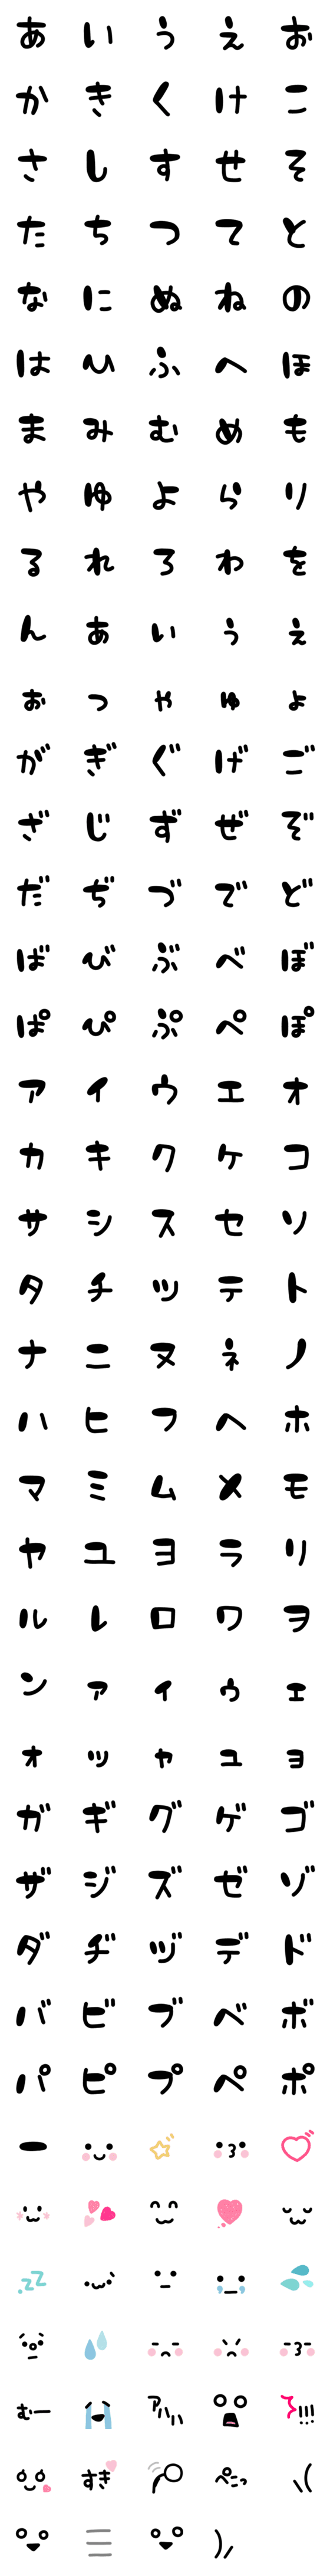 [LINE絵文字]手描きゆる顔文字セットの画像一覧